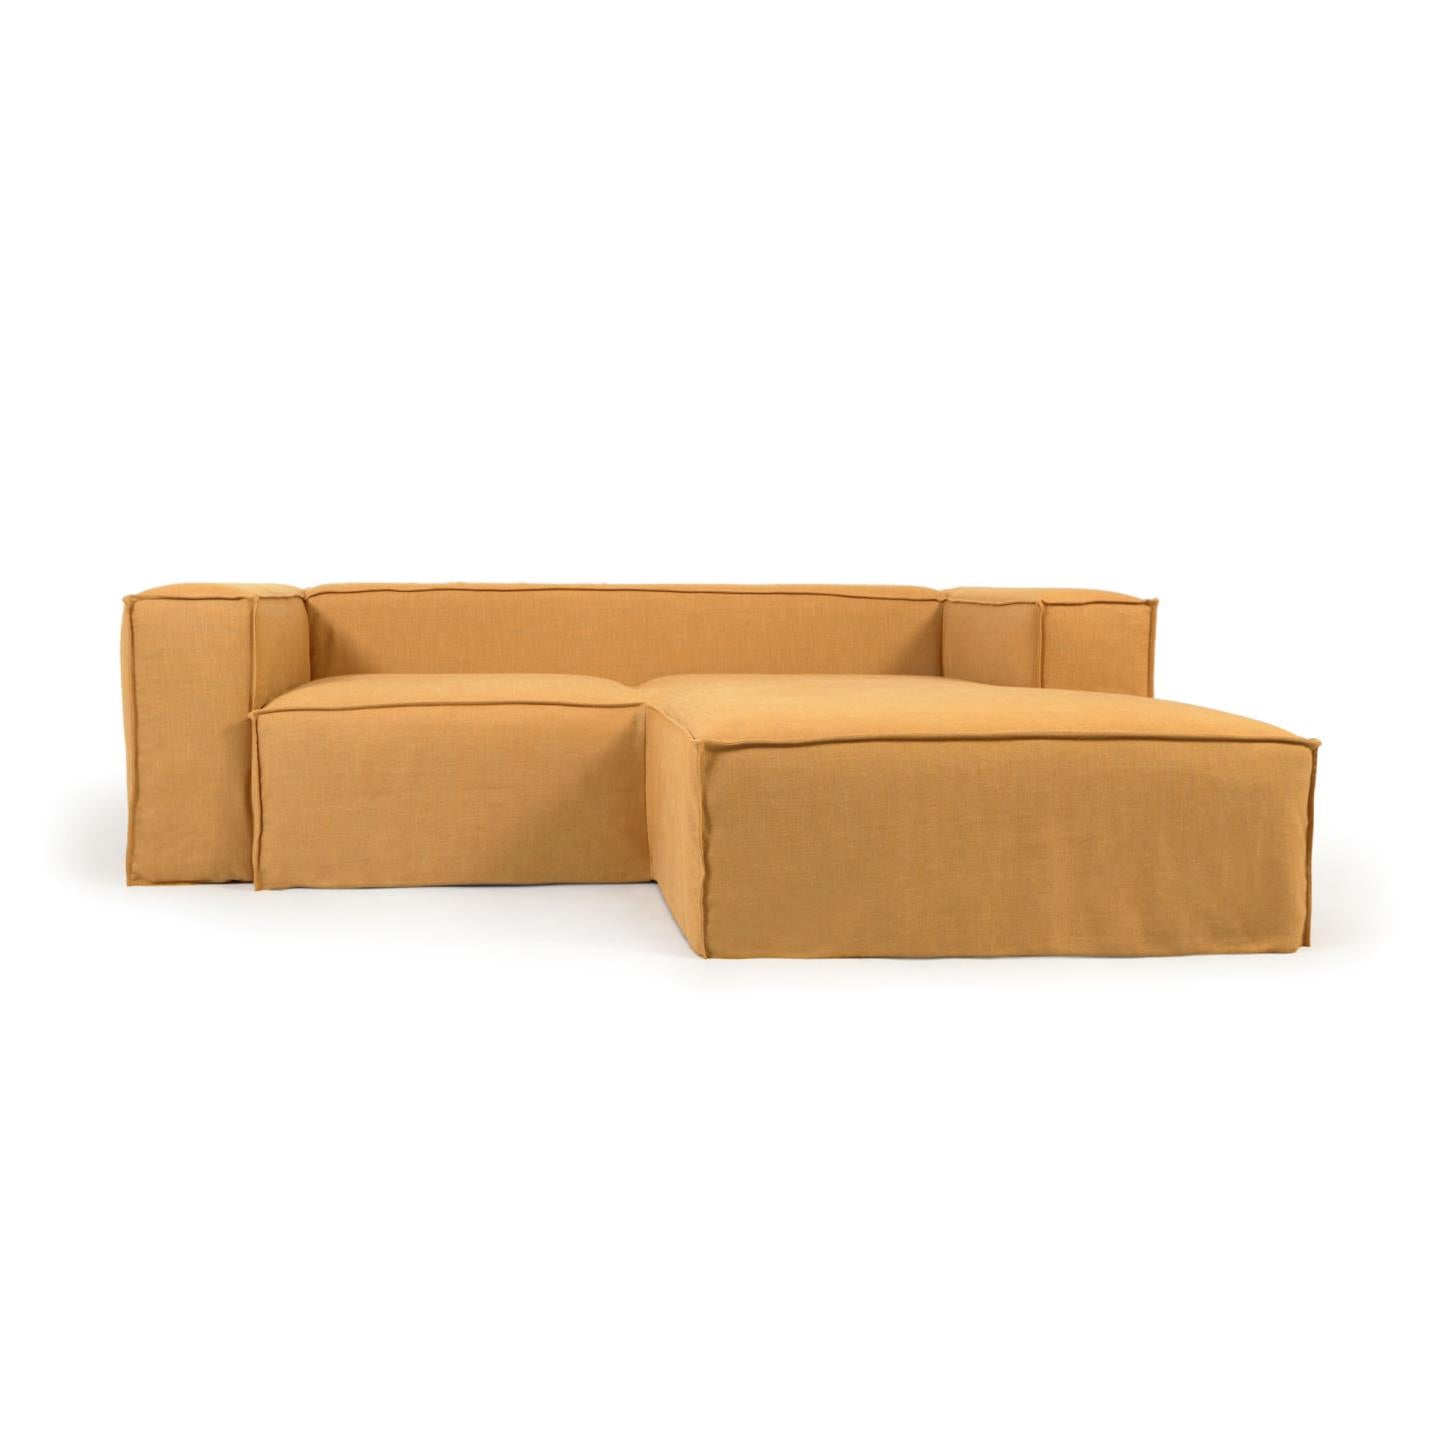 Blok 2 seater sofa with right-hand chaise longue & removable covers, mustard linen, 240 cm